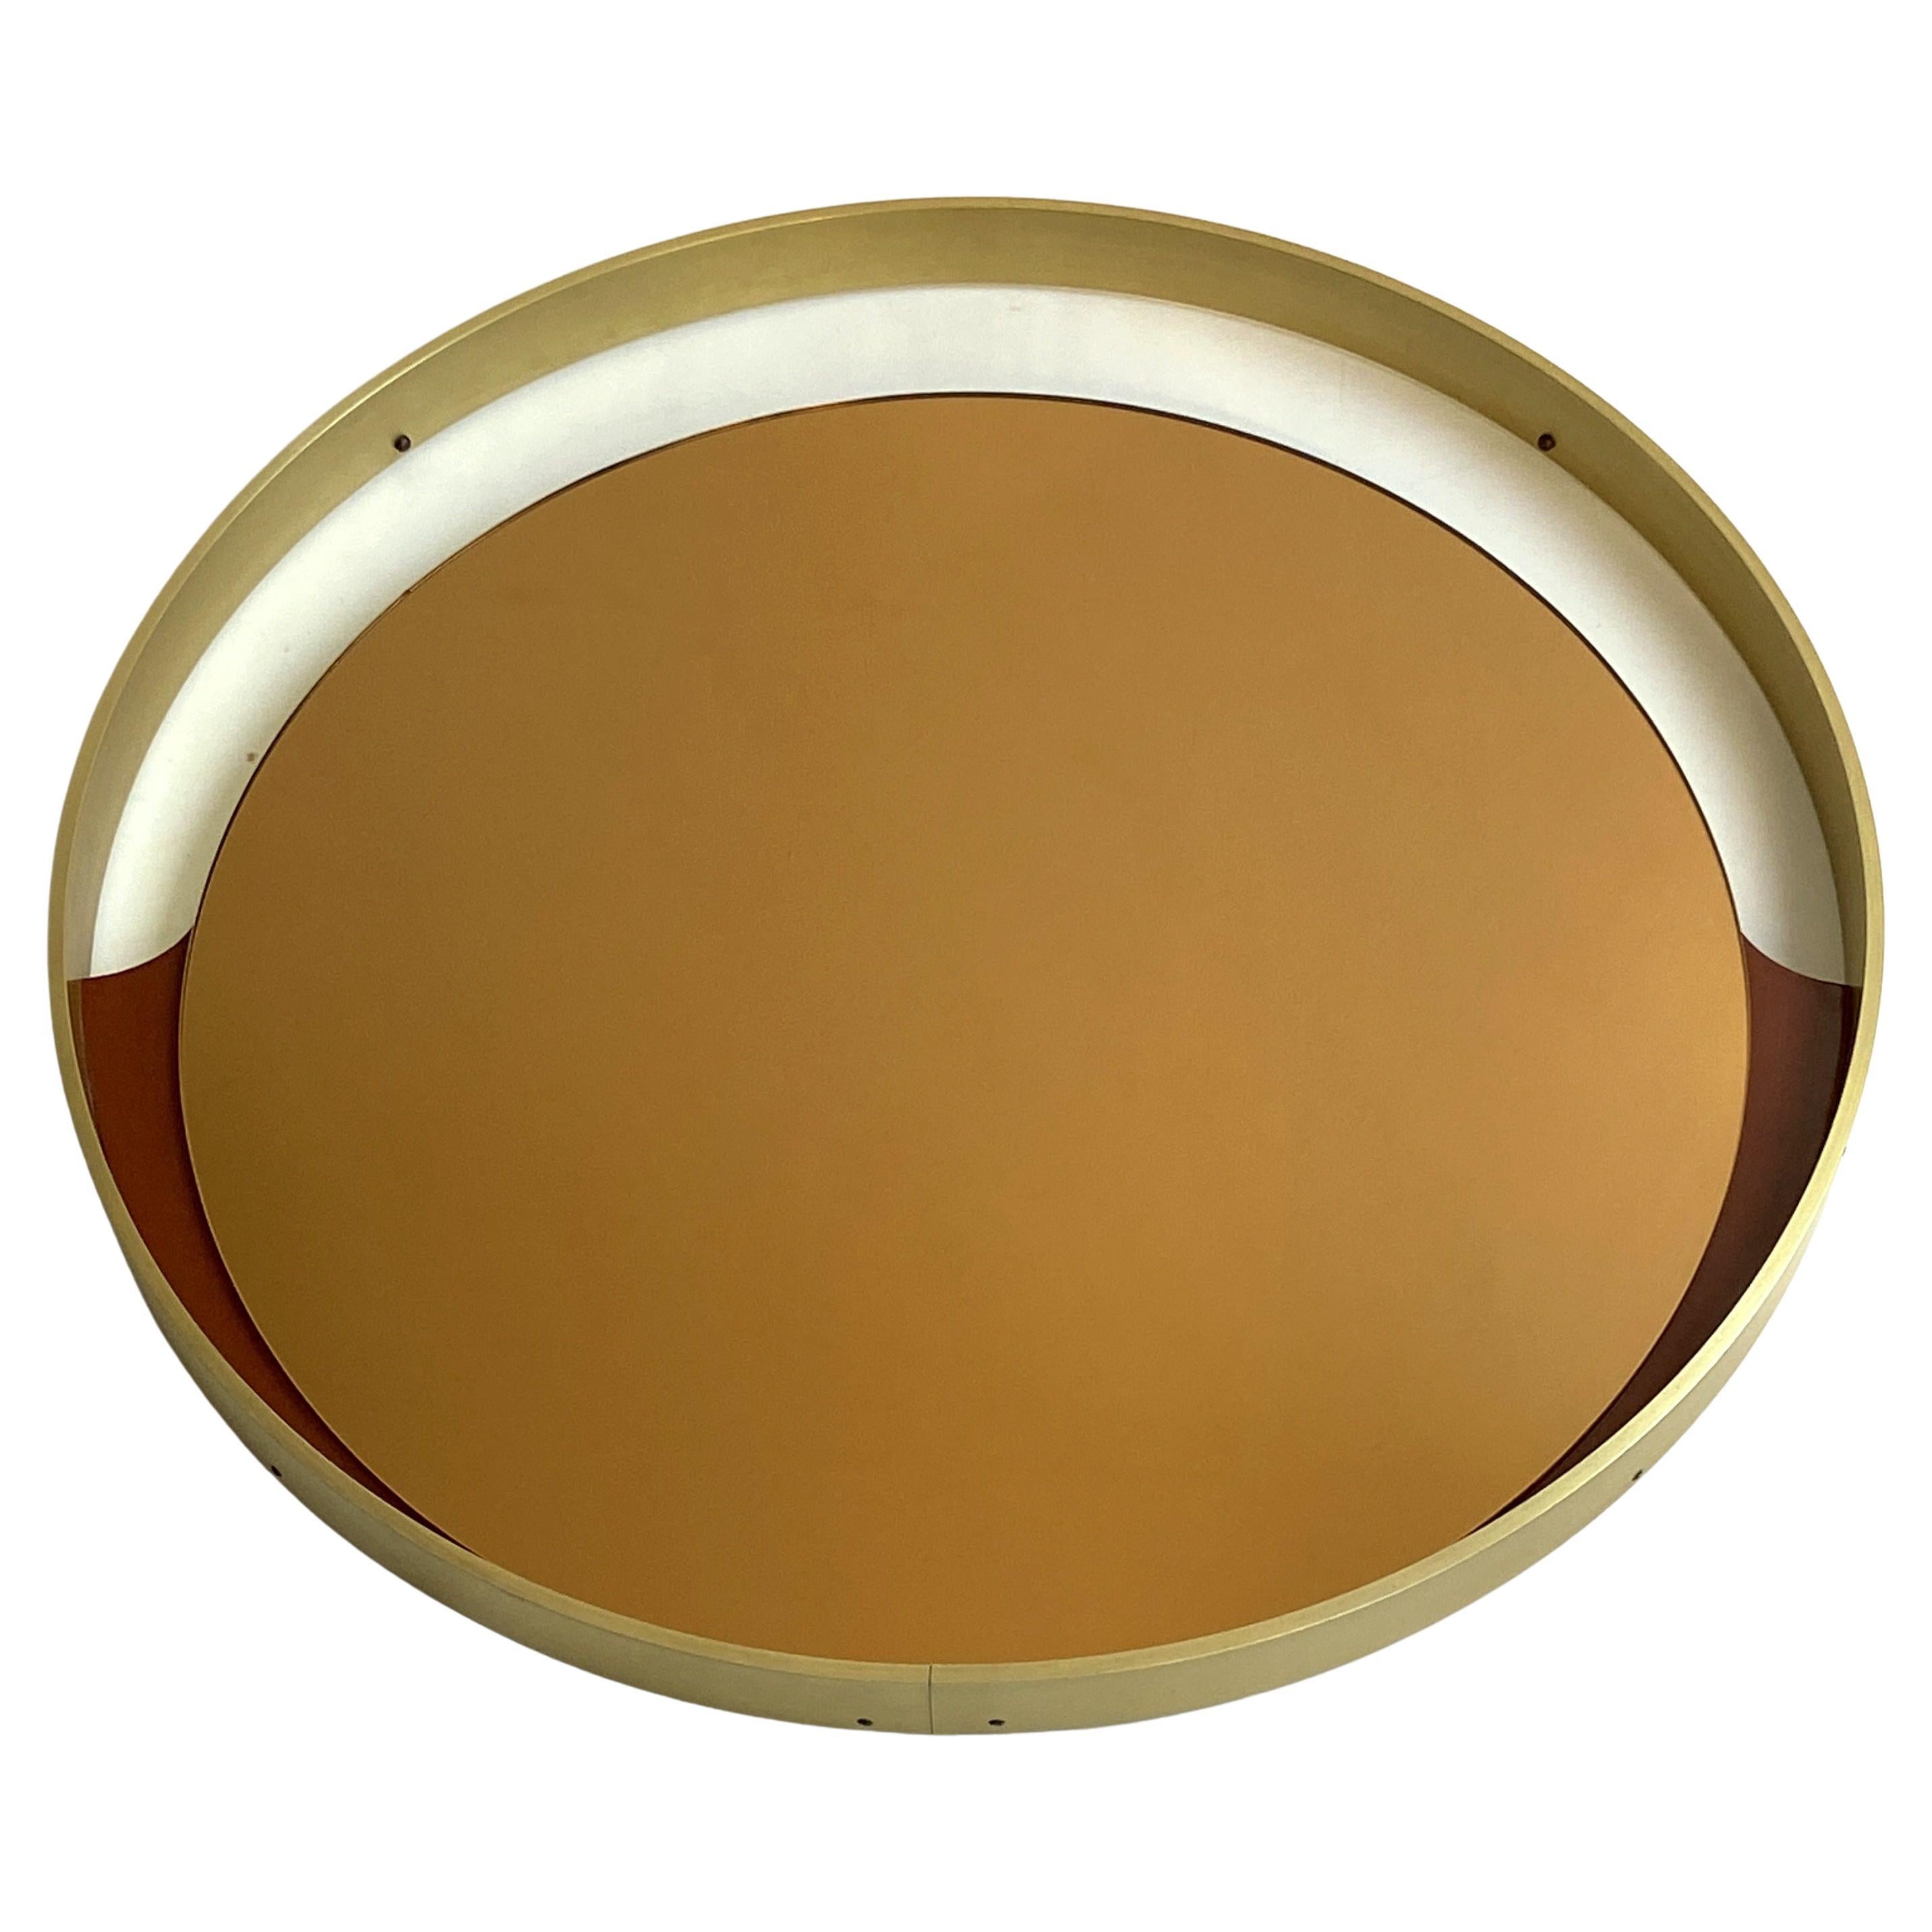 Mid-Century Modern Minimalist Tinted Bronze Round Mirror by Rimadesio Italy 1970s For Sale